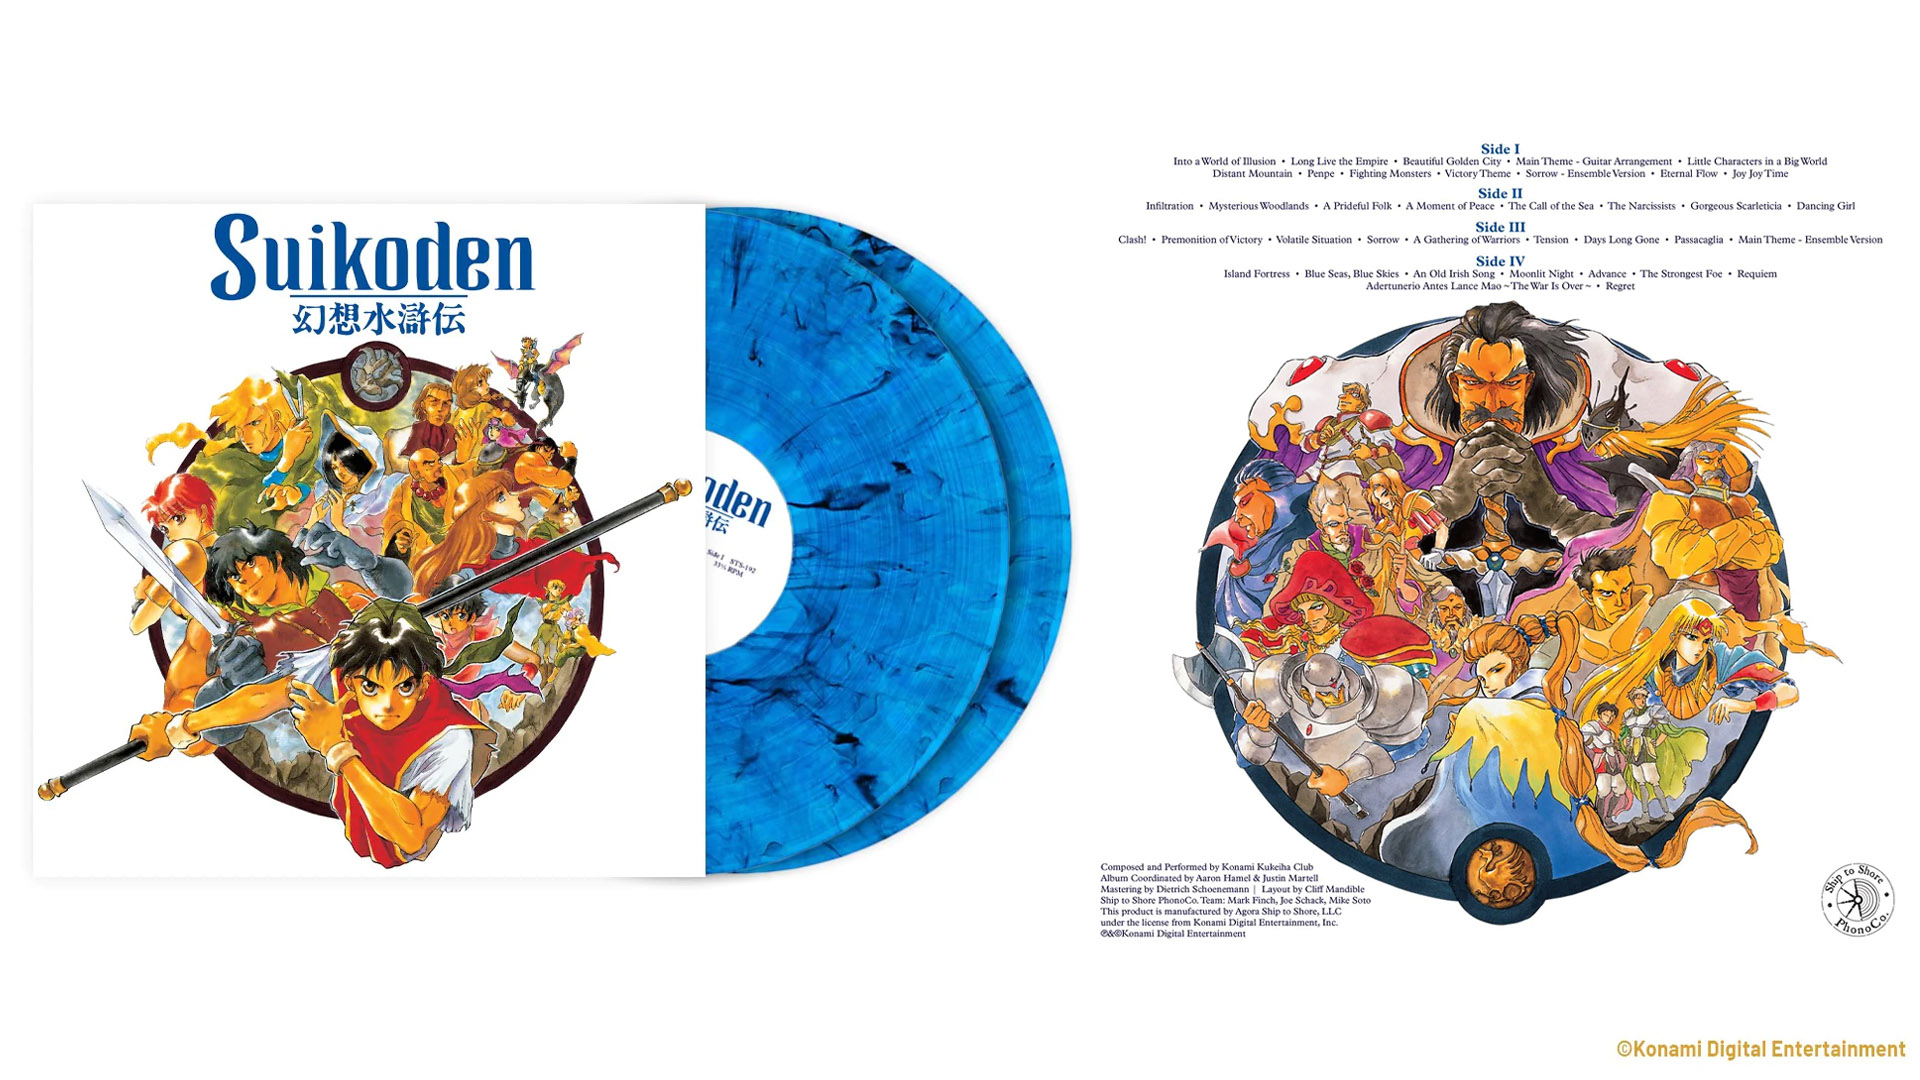 A screenshot of the Suikoden Vinyl Soundtrack. The record is colored in marble blue and peeks outside of a white record sleeve. The record sleeve has the words Suikoden in large blue lettering.